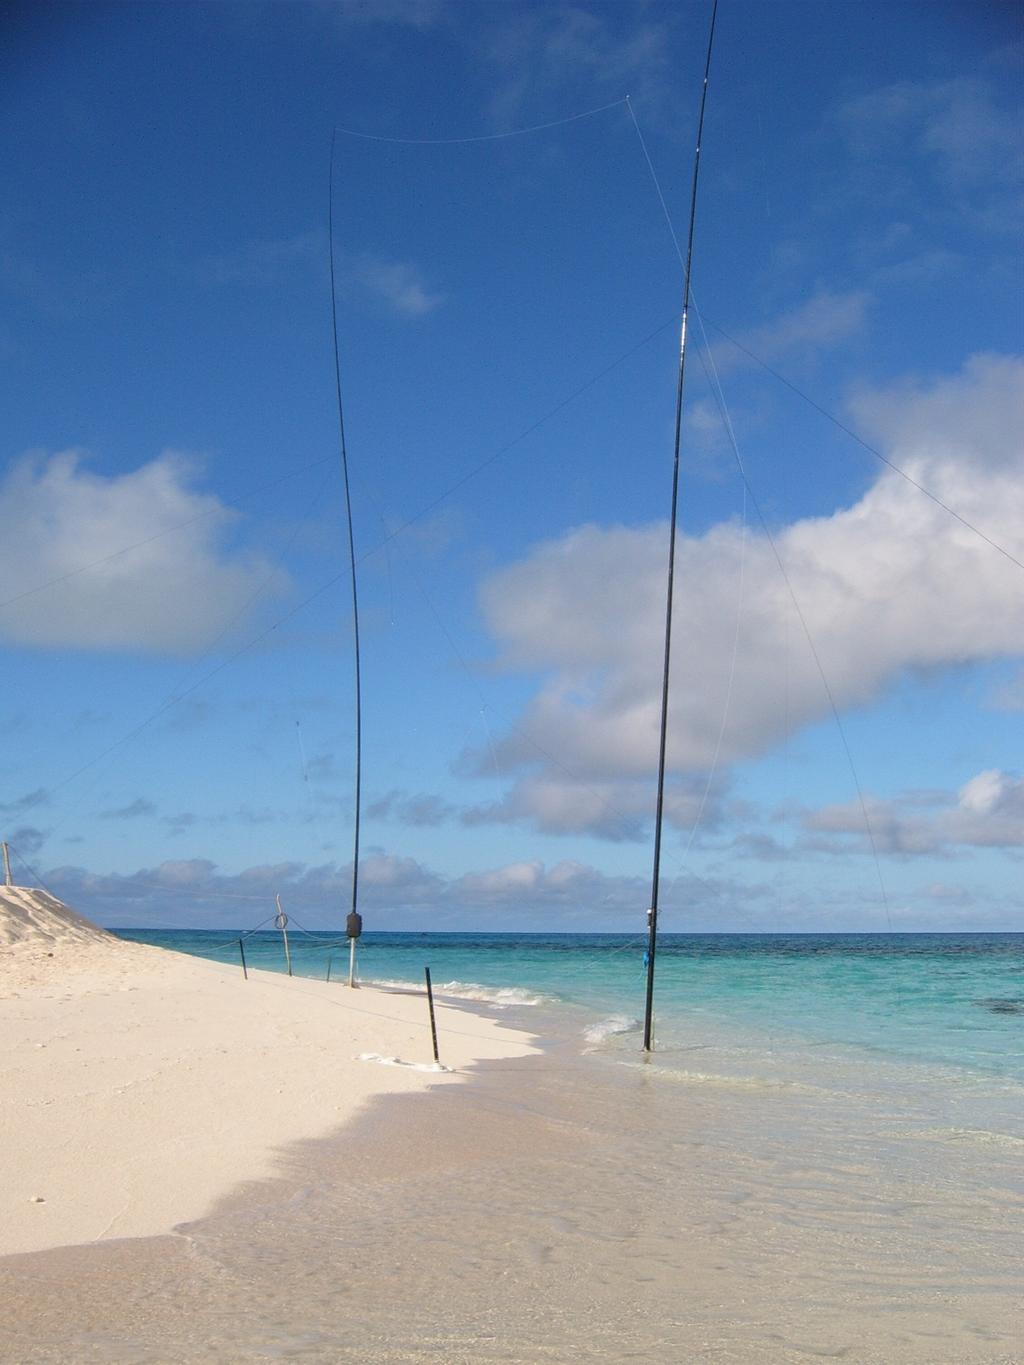 Introduction VK9GMW, operating from Mellish Reef from March 28 to April 13, 2009, put good signals into both NA and Europe on all bands, including 160 meters.